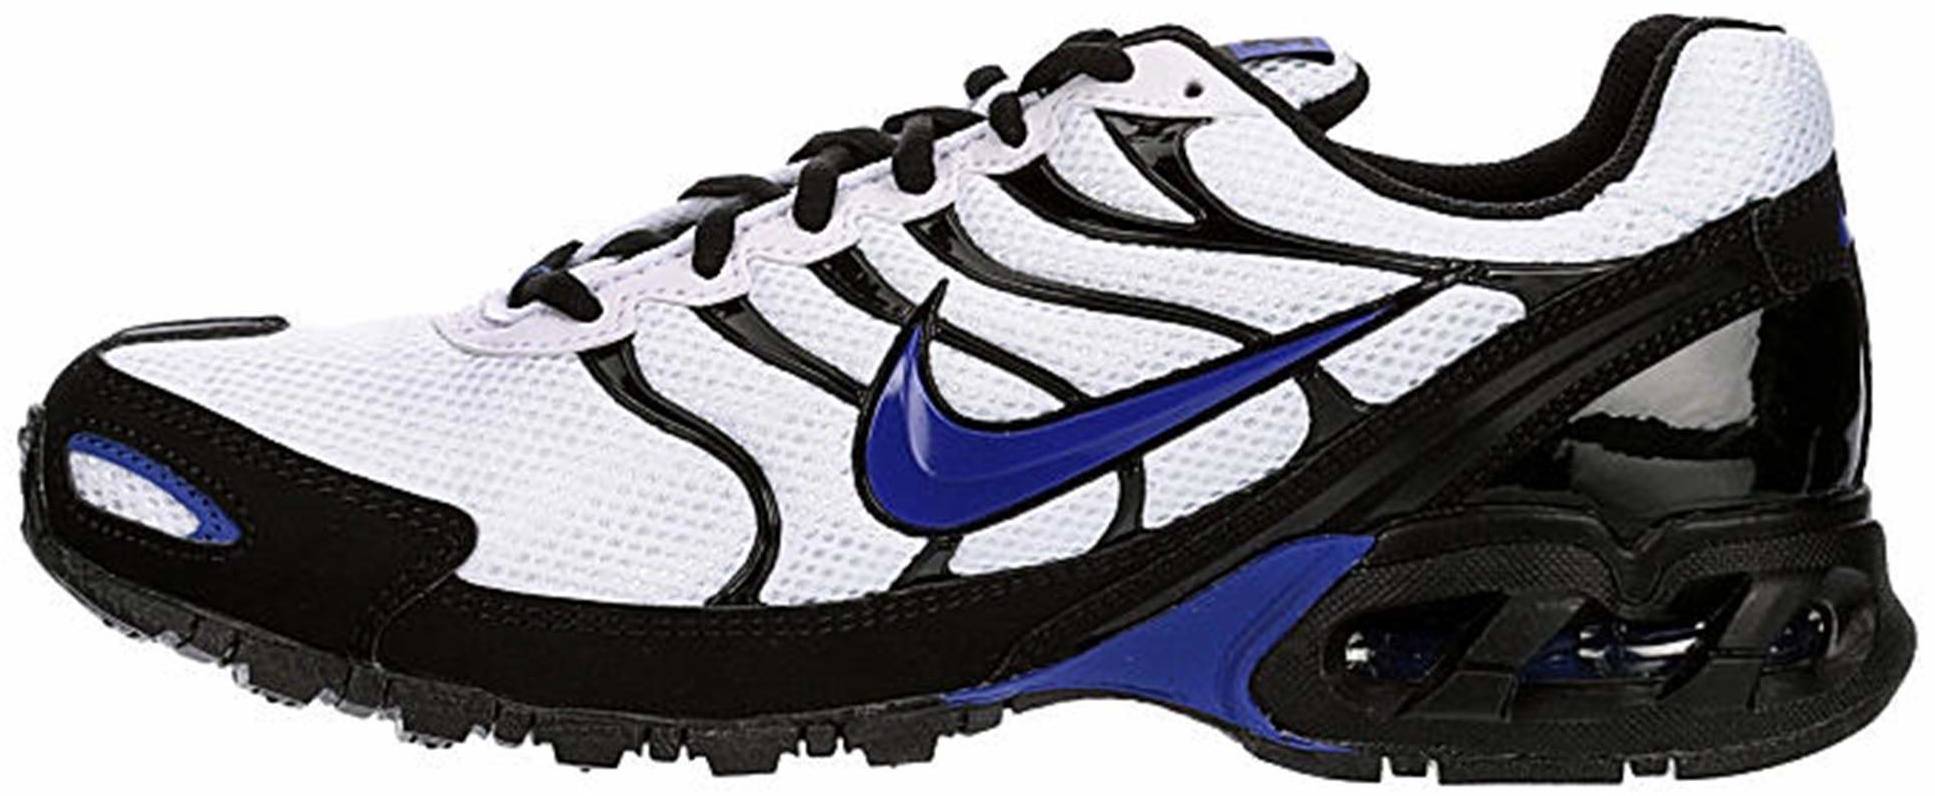 nike air max torch 3 men's running shoes